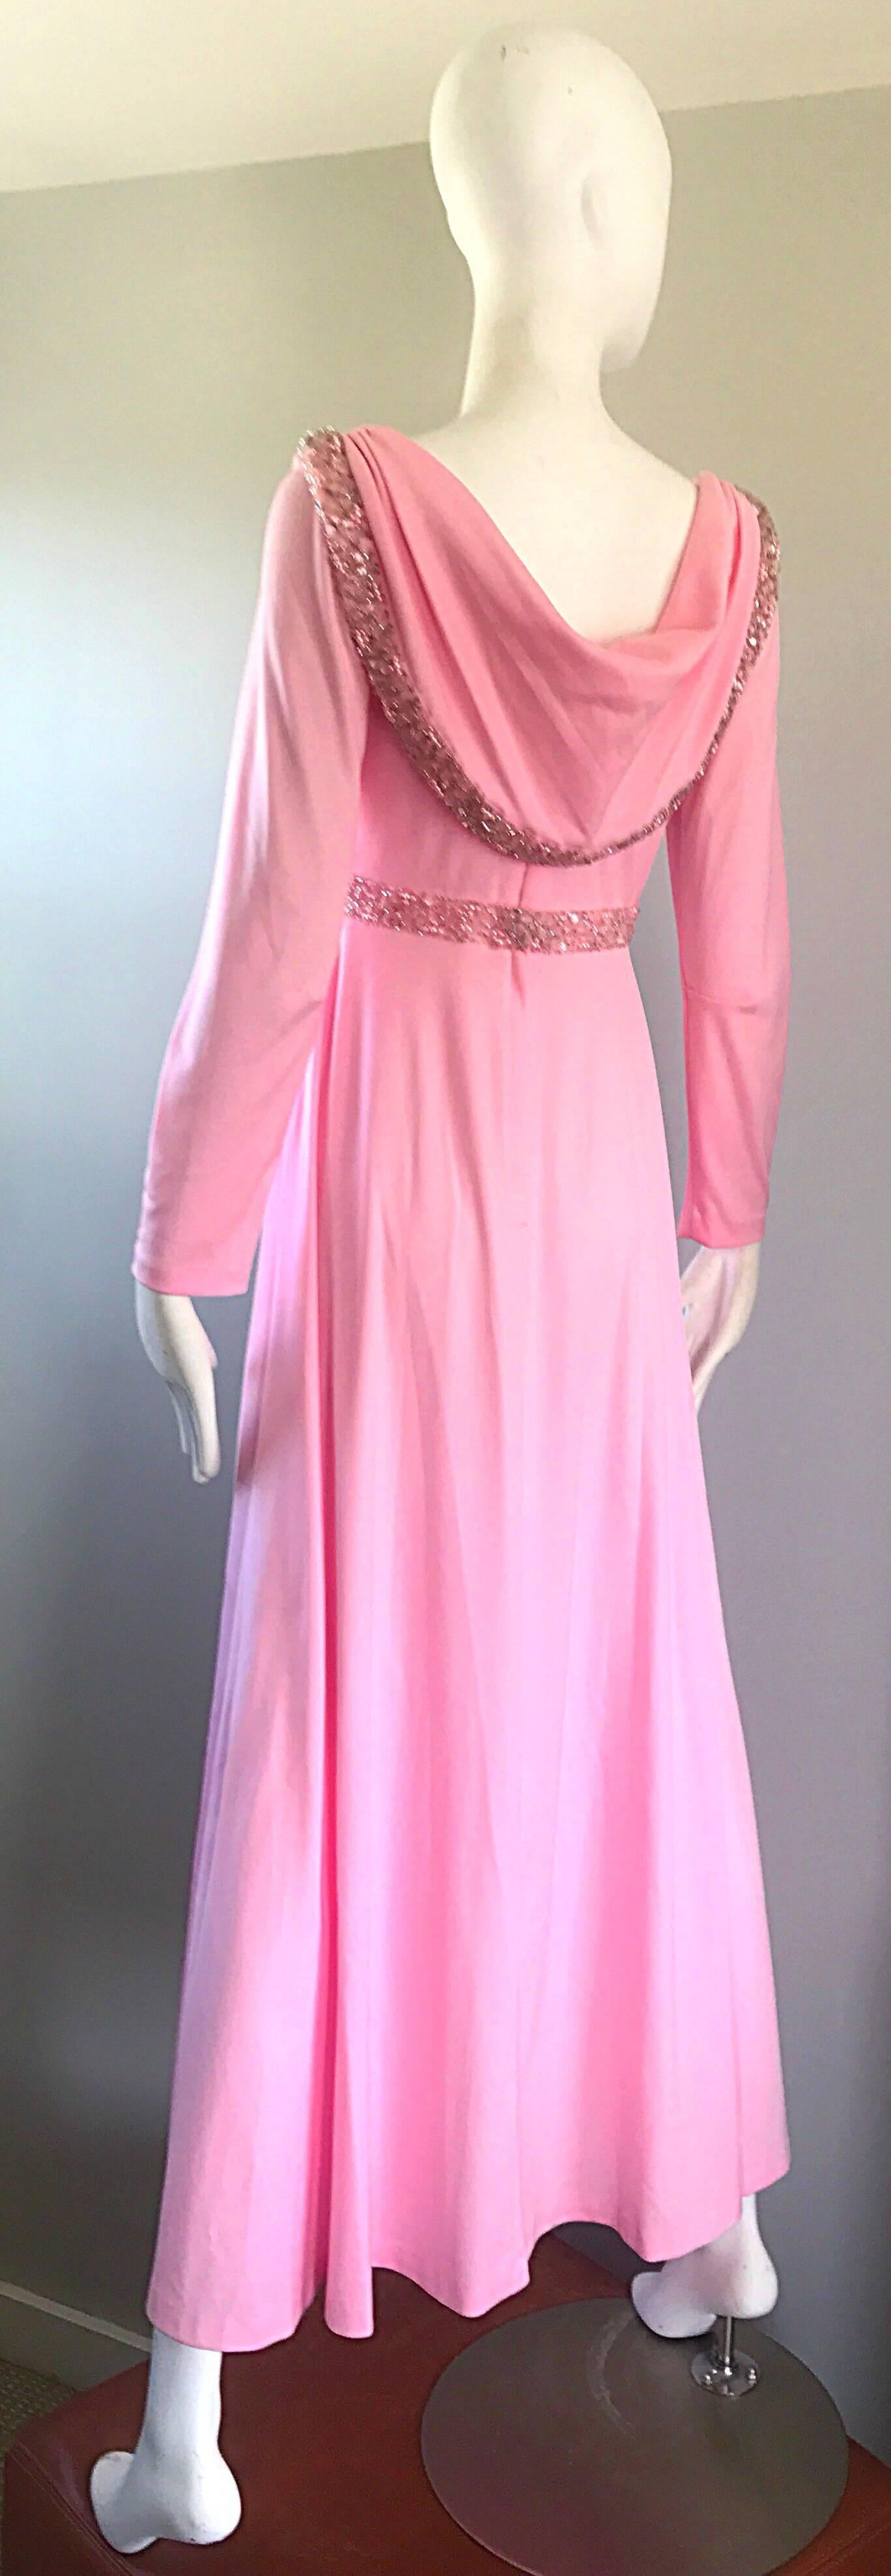 Women's Amazing 1970s Light Pink Grecian Sequined and Beaded Long Sleeve Maxi Dress Gown For Sale